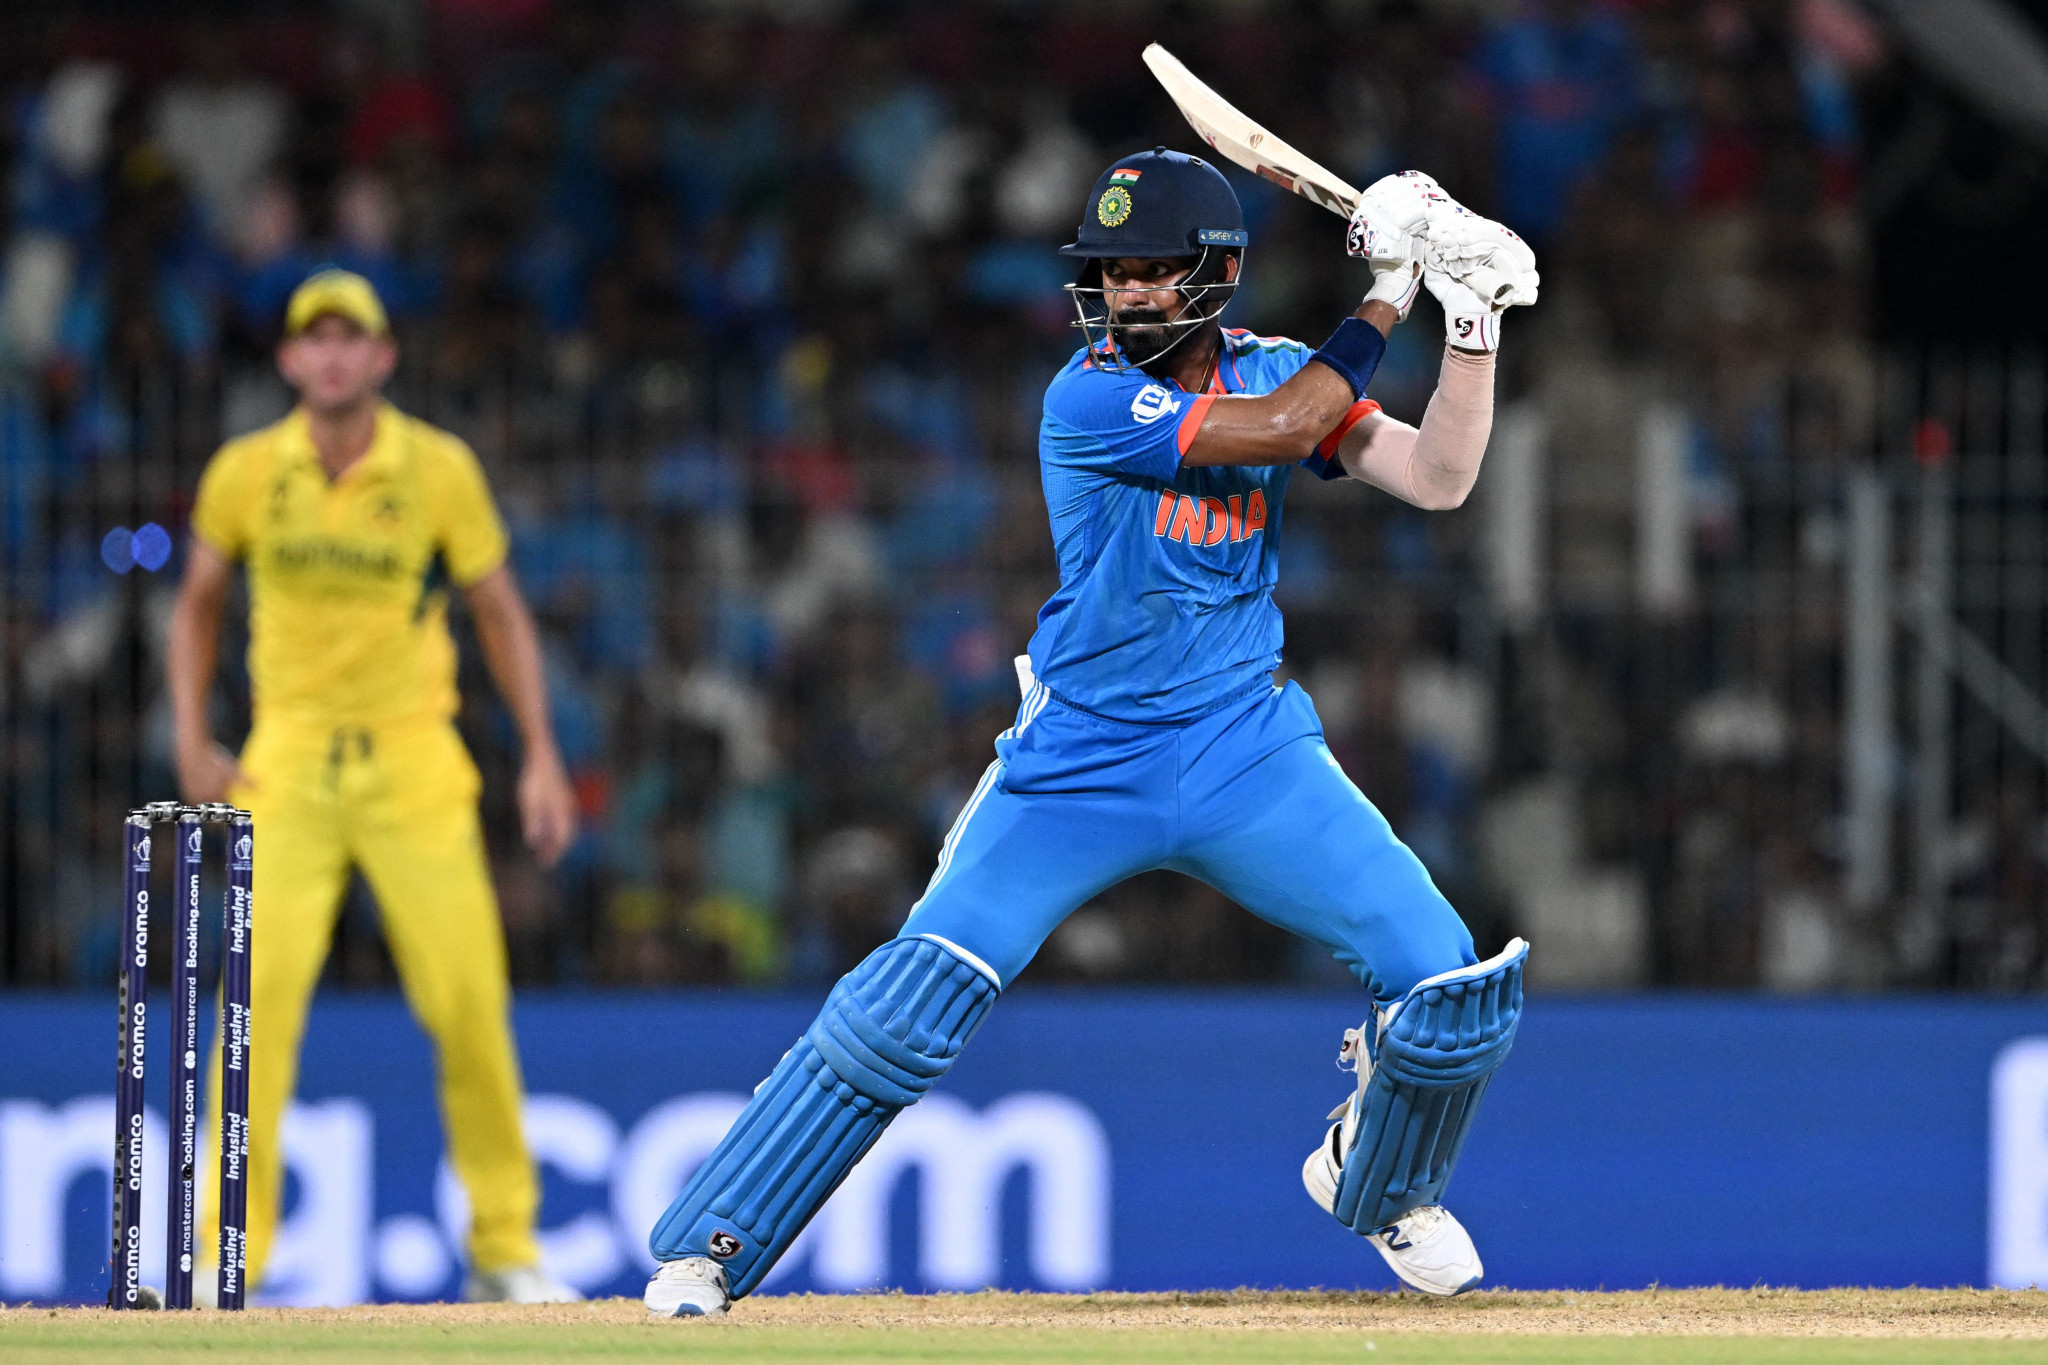 India made a victorious start in the World Cup by defeating Australia with a six-wicket margin